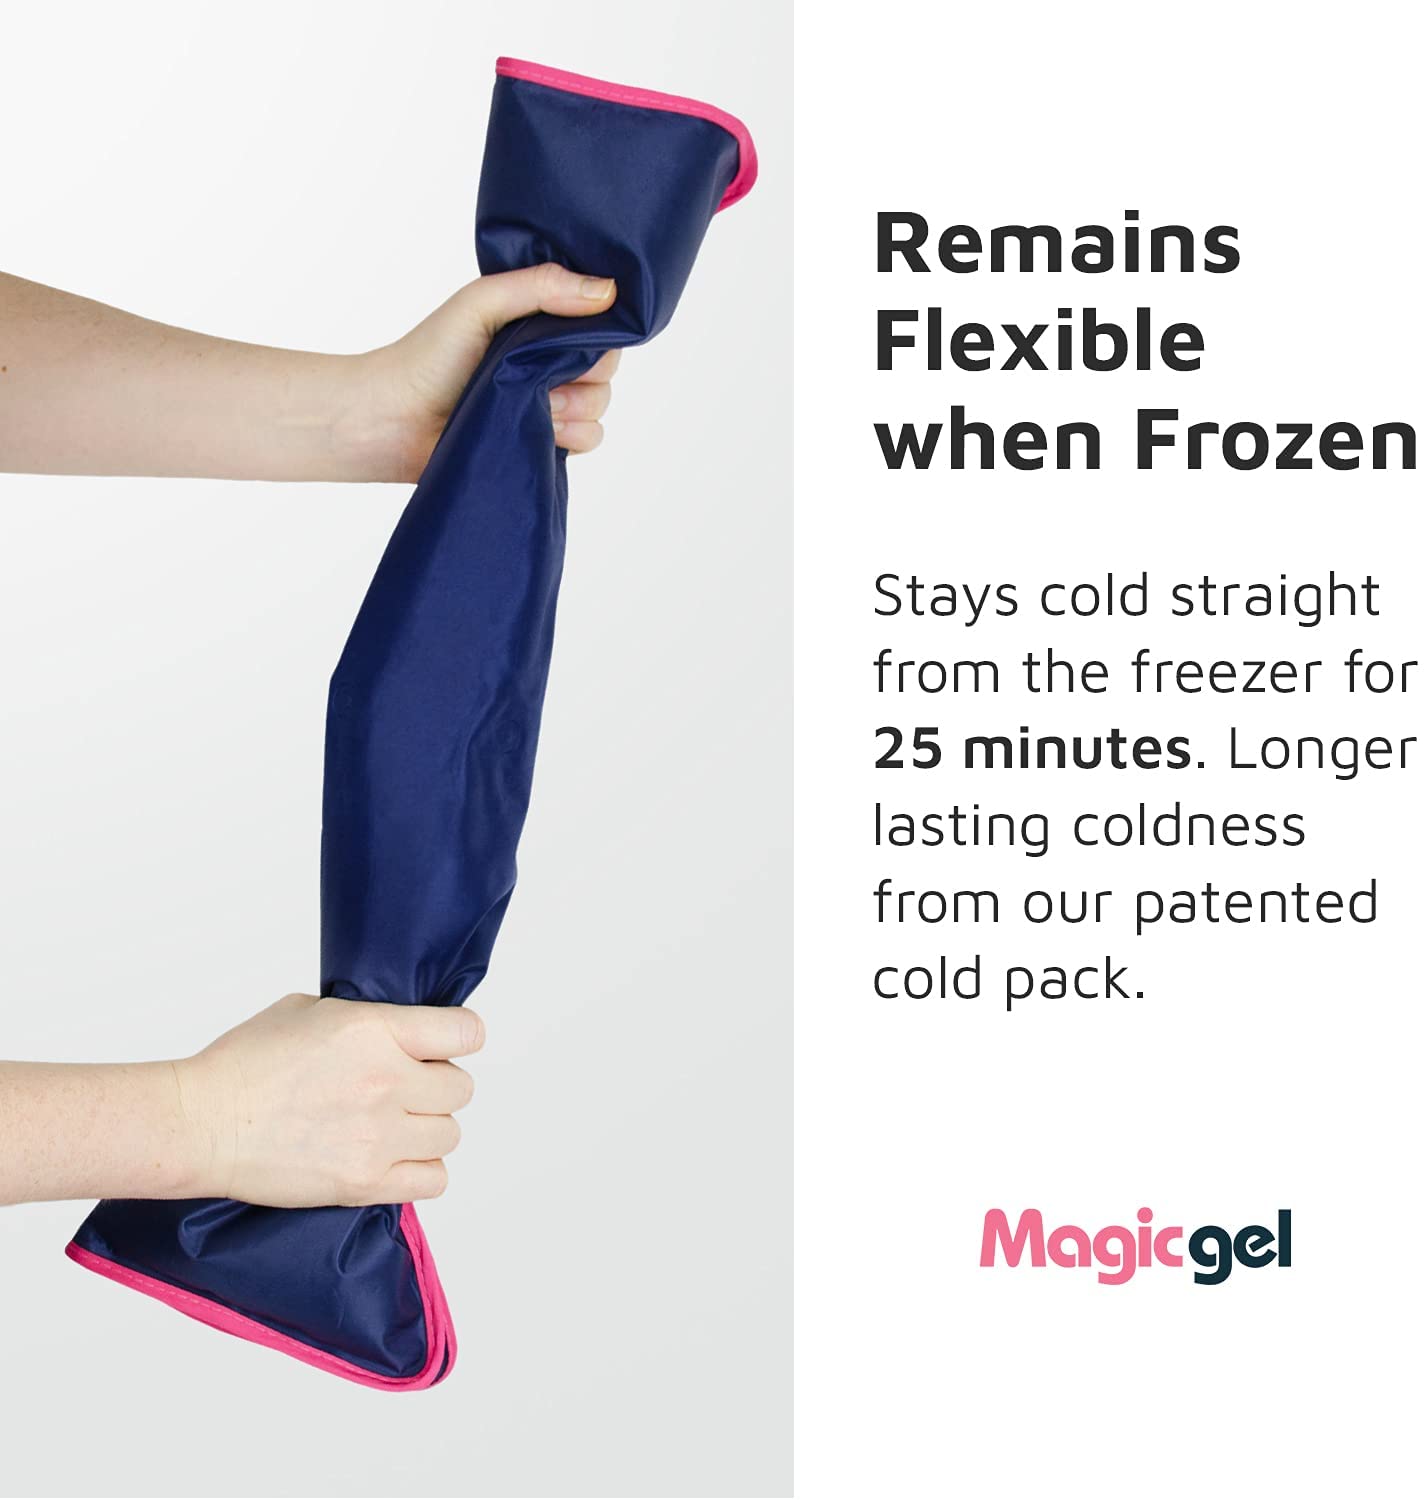 Leg Ice Pack to Reduce Pain and Swelling